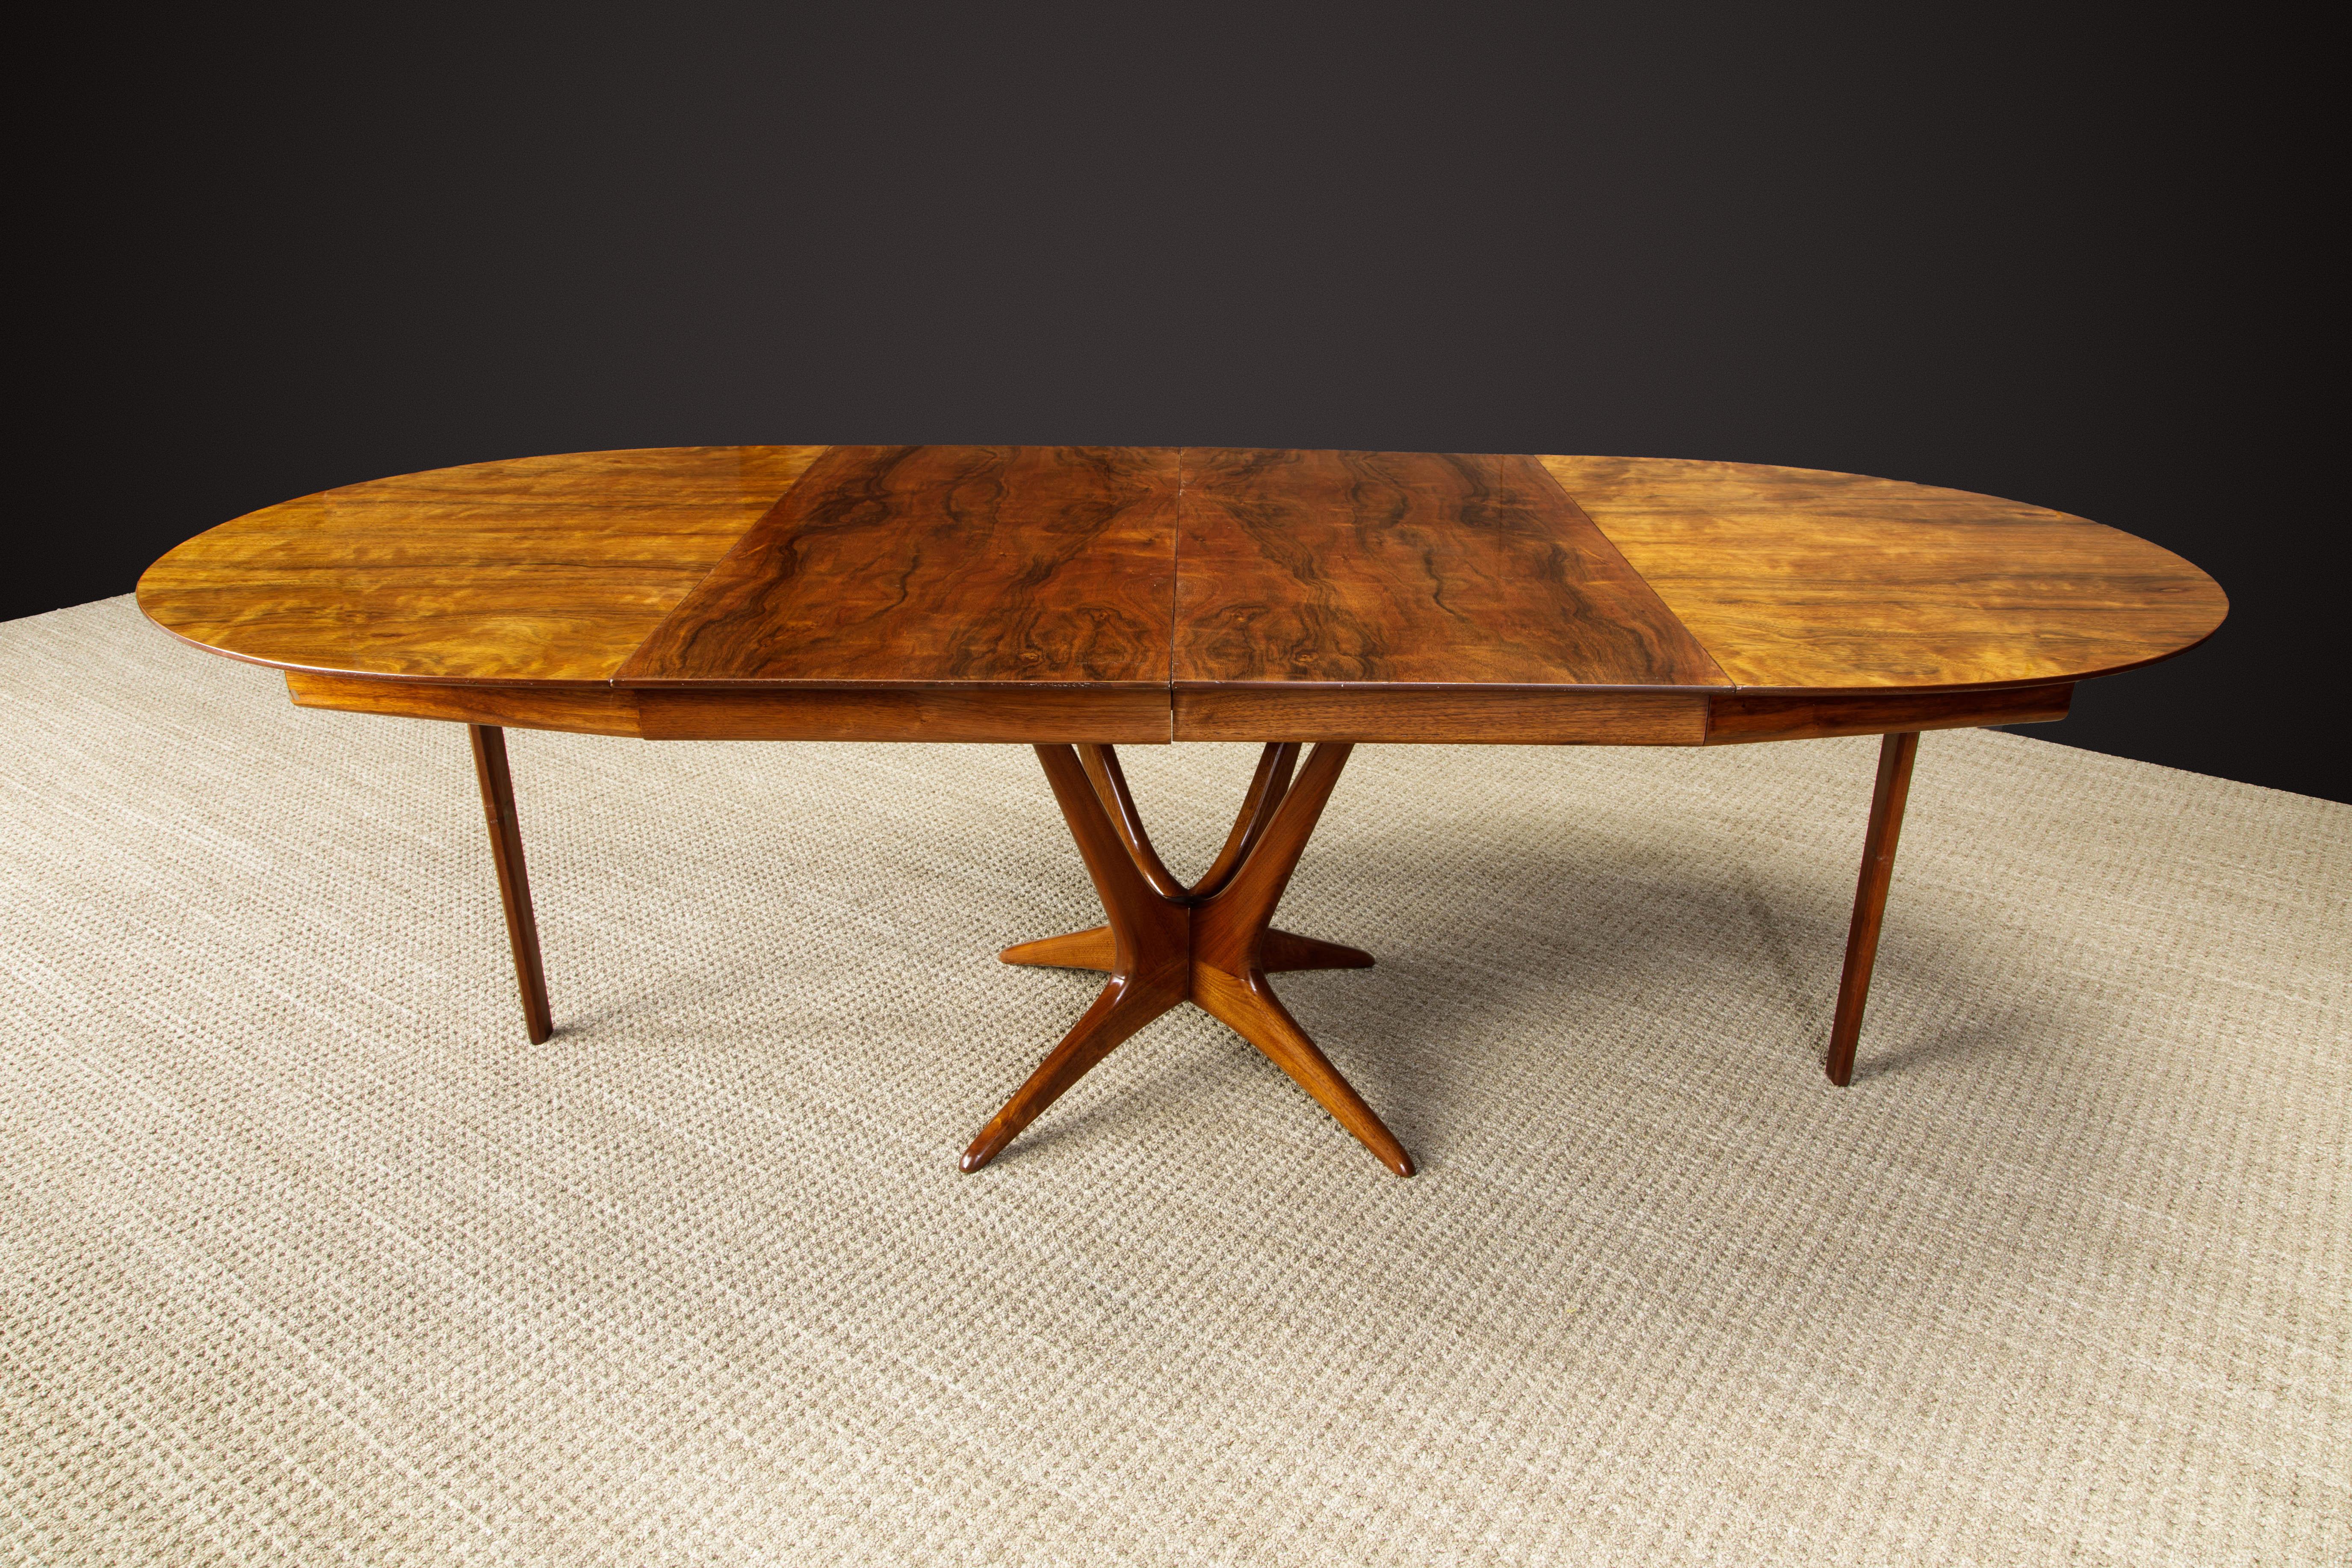 Mid-20th Century Important Model #2060 Table by Vladimir Kagan for Kagan-Dreyfuss, 1950s, Signed